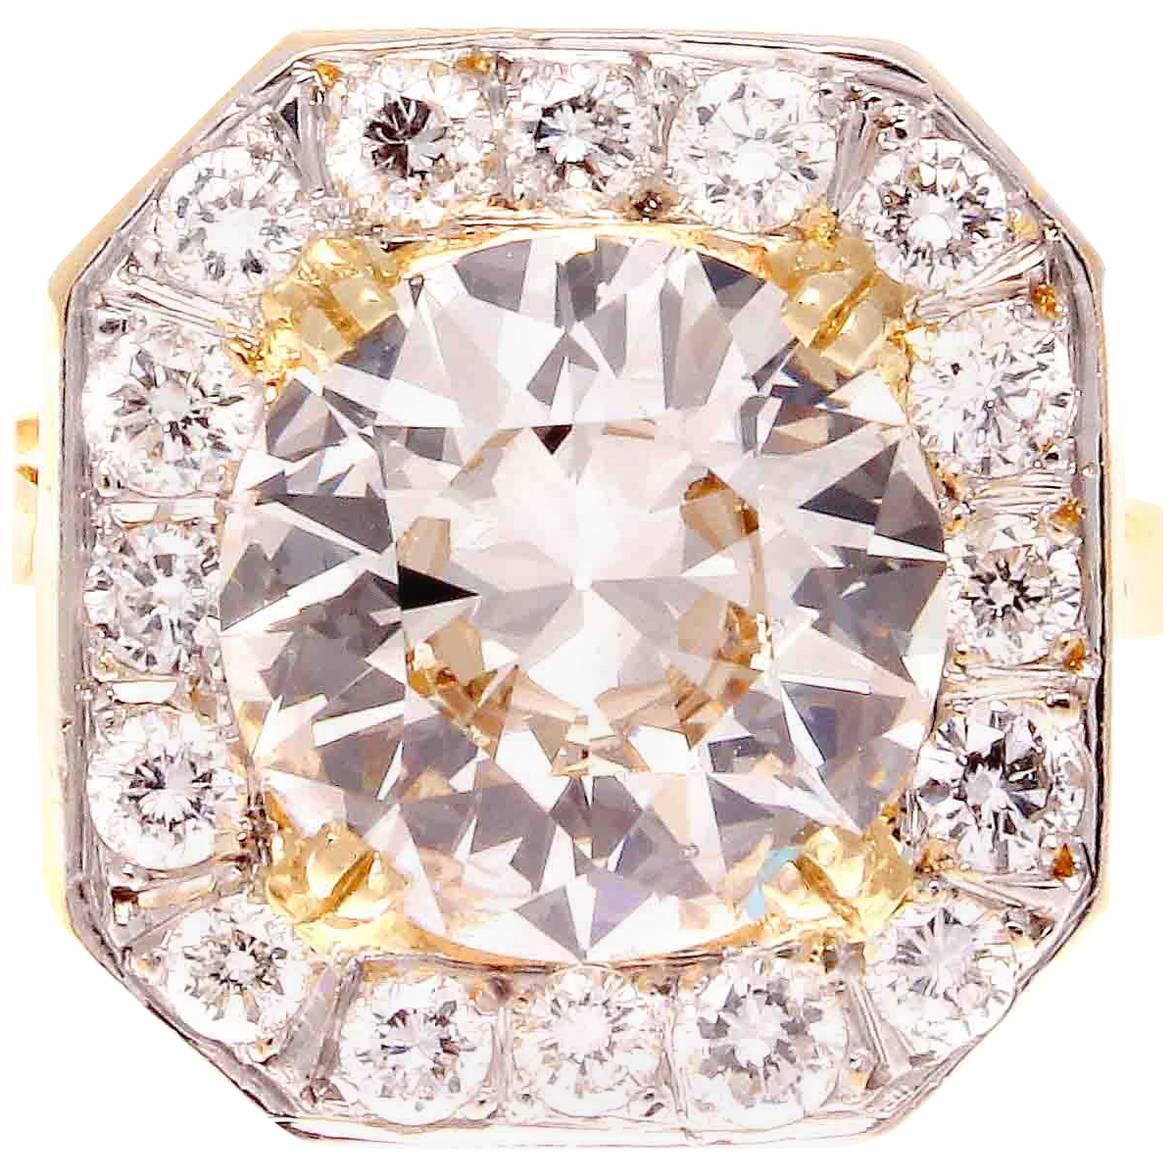 A magical dream that evolved into reality from the golden art deco era of jewelry. Featuring a 3.05 carat old European cut diamond that is K color, SI1 clarity. Surrounded by a celestial halo of old cut diamonds. Hand crafted in platinum and 18k